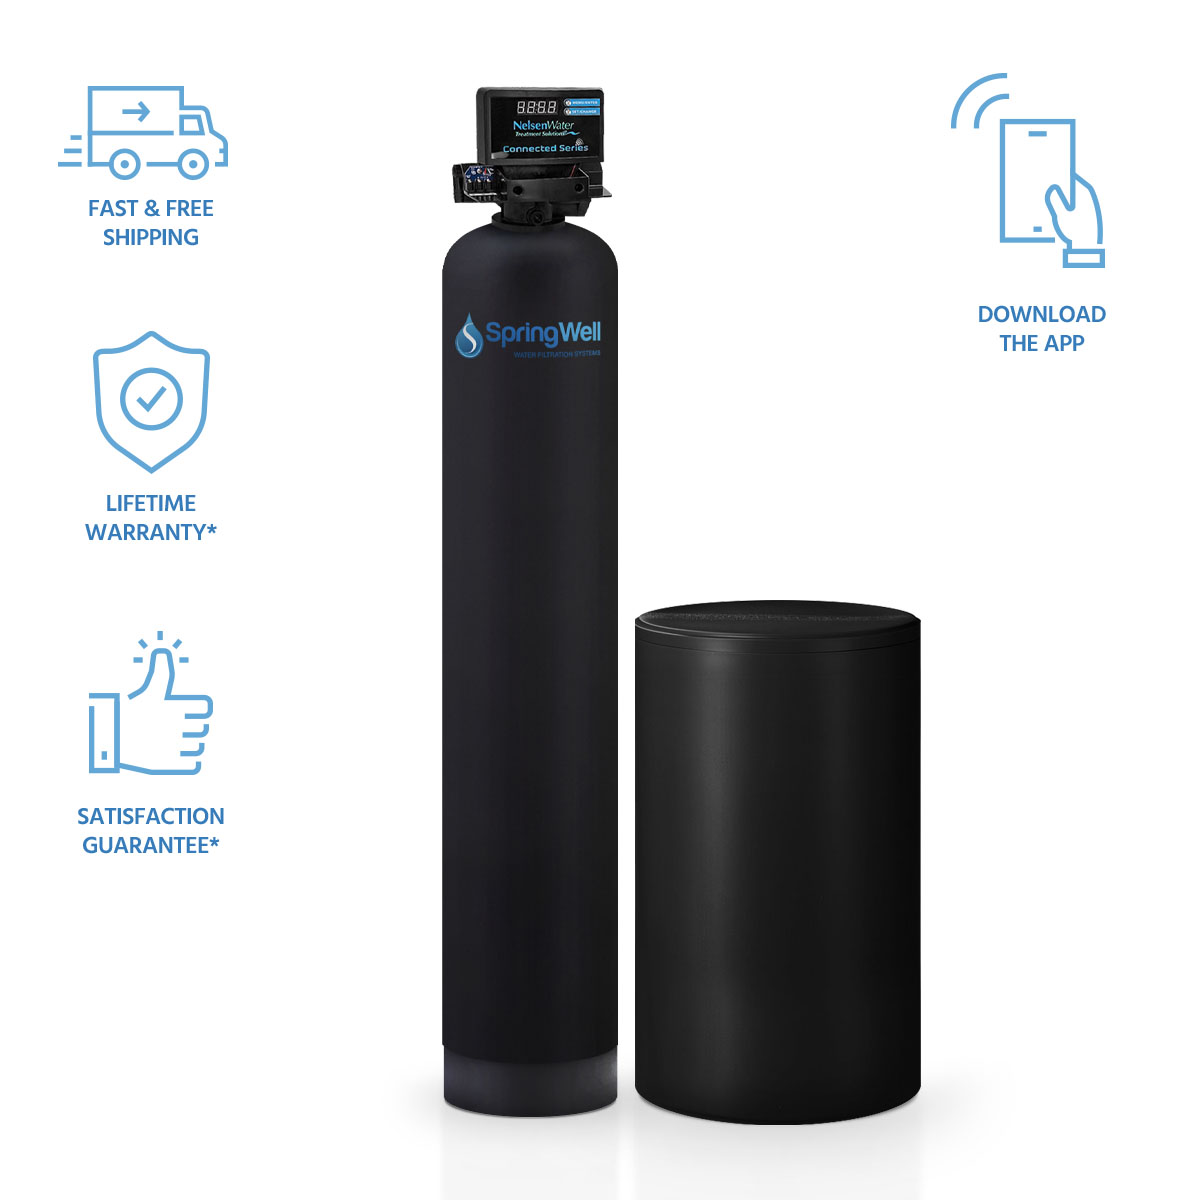 Water Softener System For The Whole House - SpringWell Salt Softener